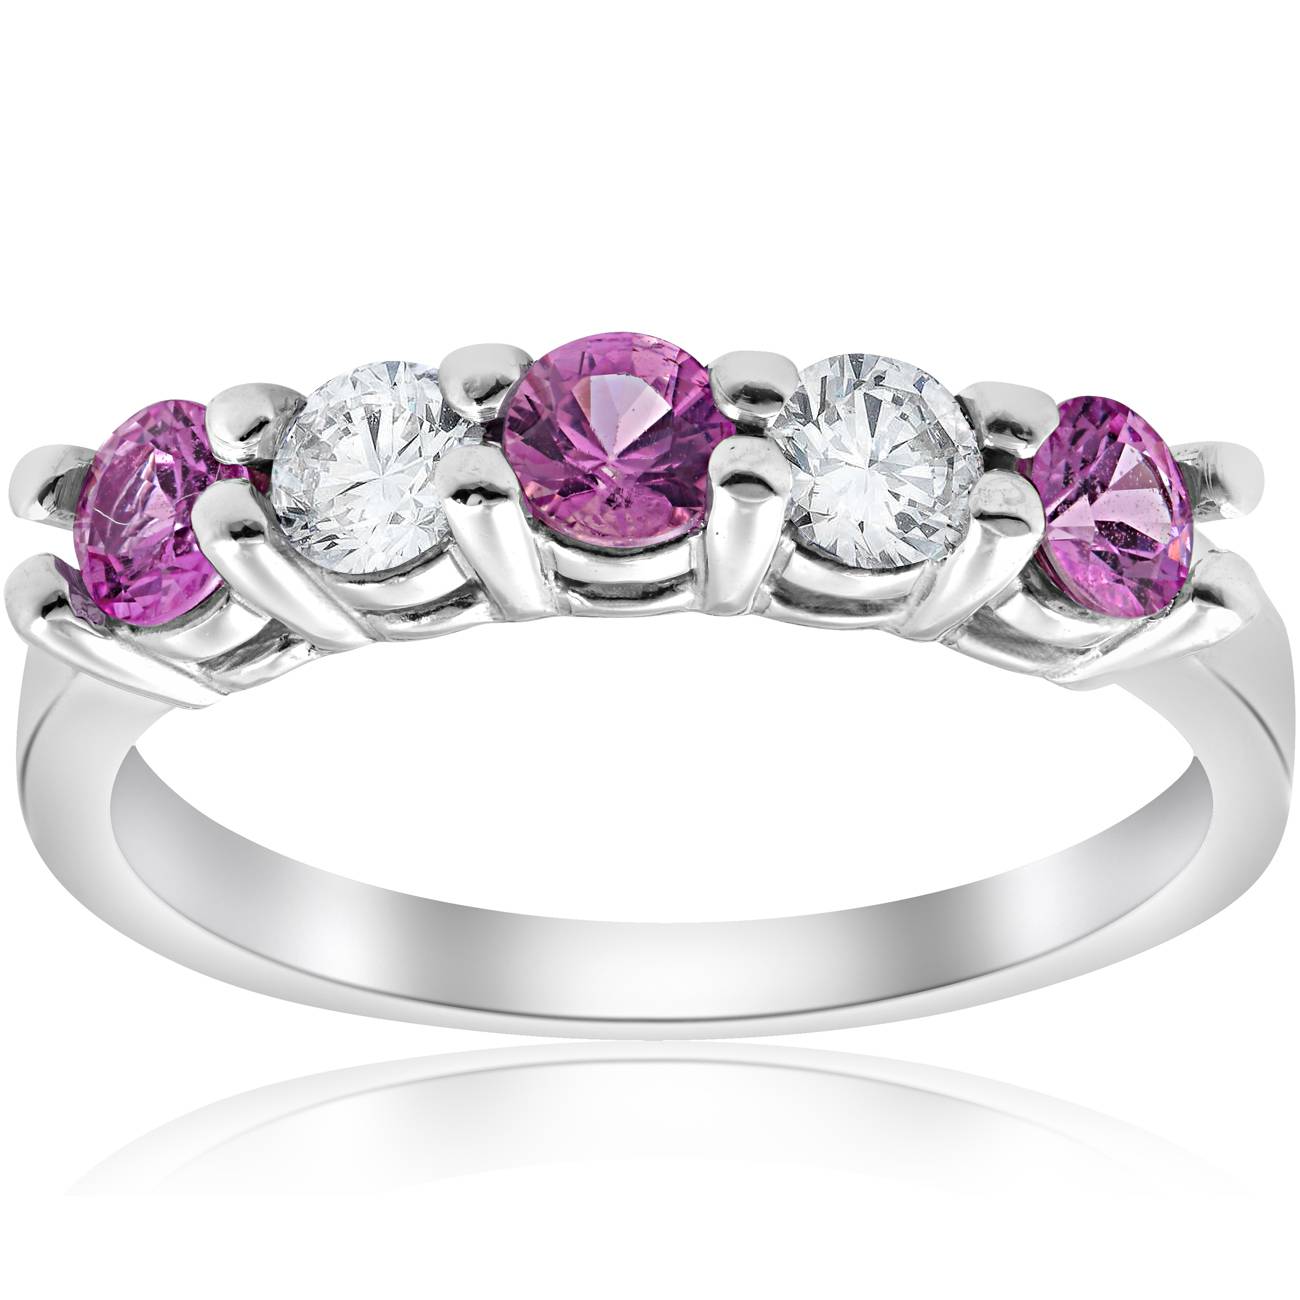 Eye Catching 1.48 ctw Pink Sapphire and Diamond Ring in 14K White and Rose Gold